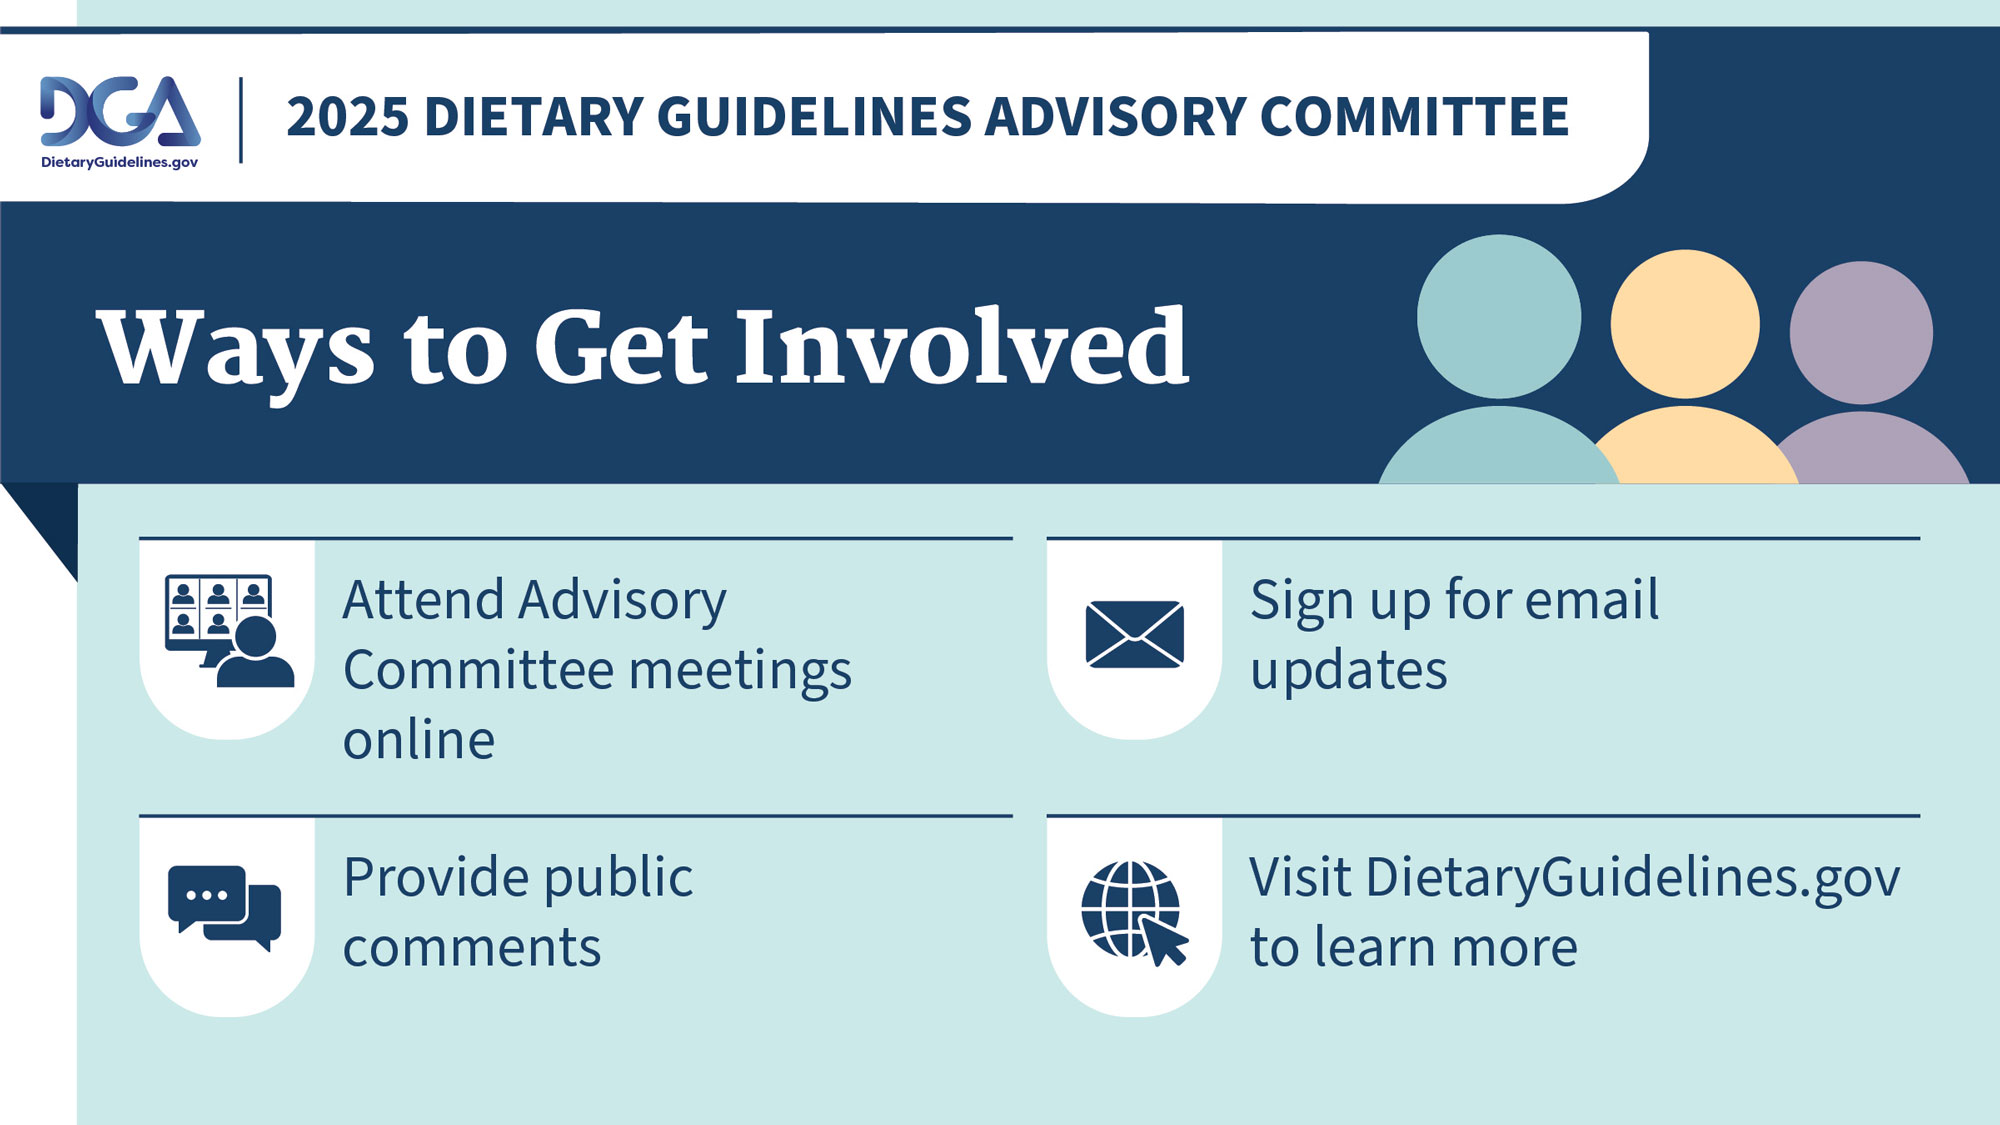 DGA Ways to Get Involved graphic